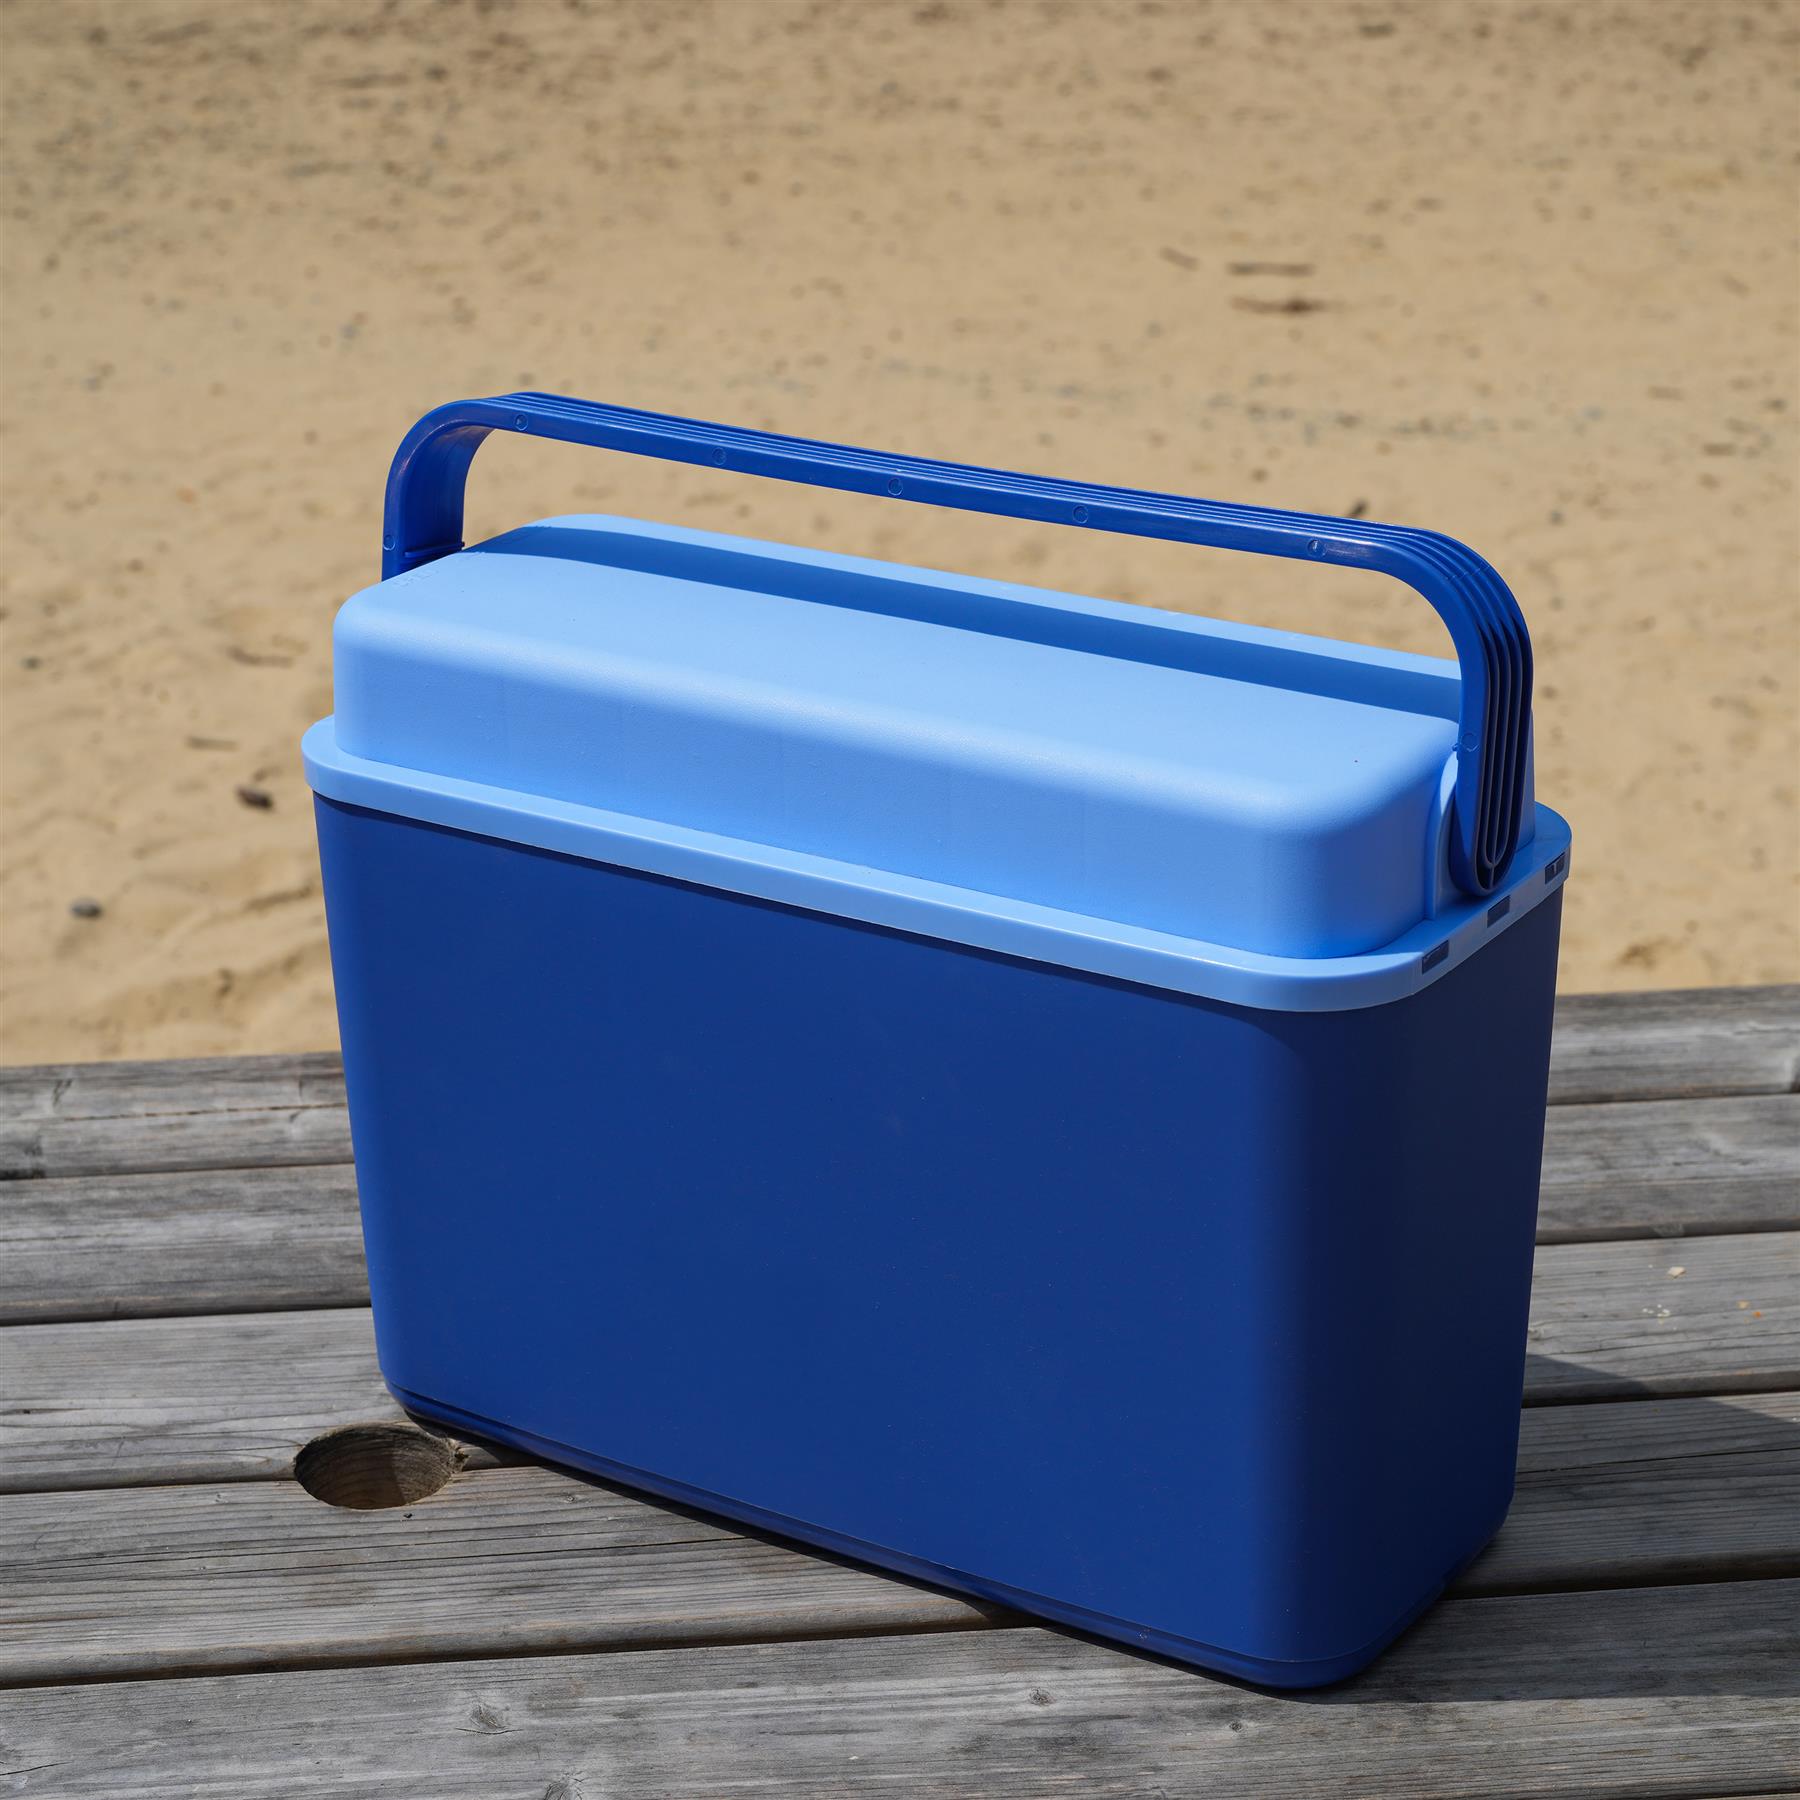 GEEZY Cool Box Large Camping 12L Cooler Box